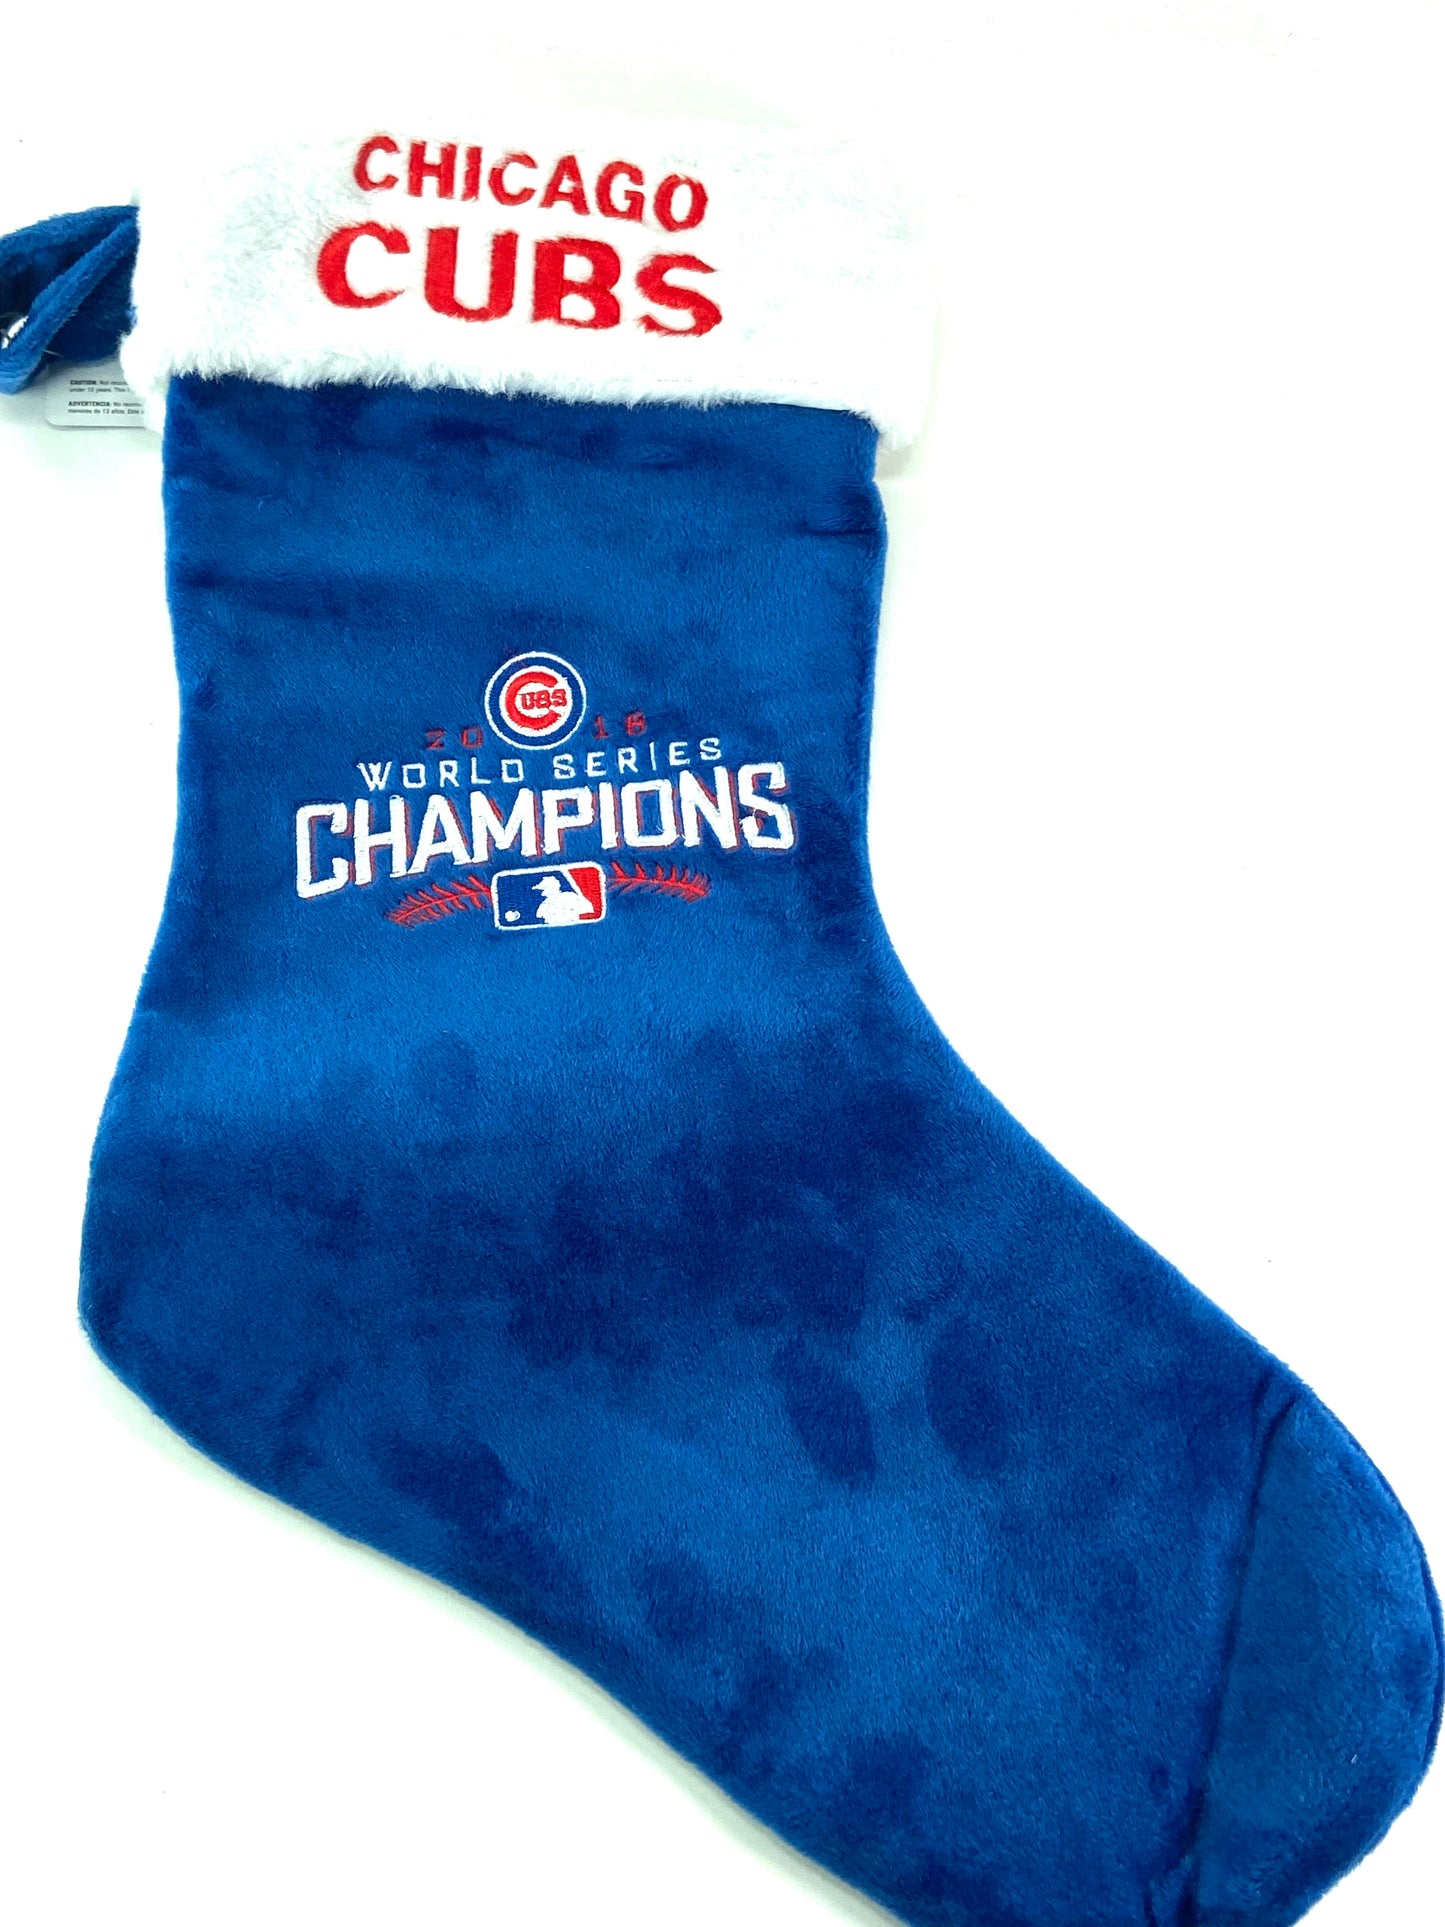 Chicago Cubs MLB 2016 World Champs Christmas Stocking by Forever Collectibles